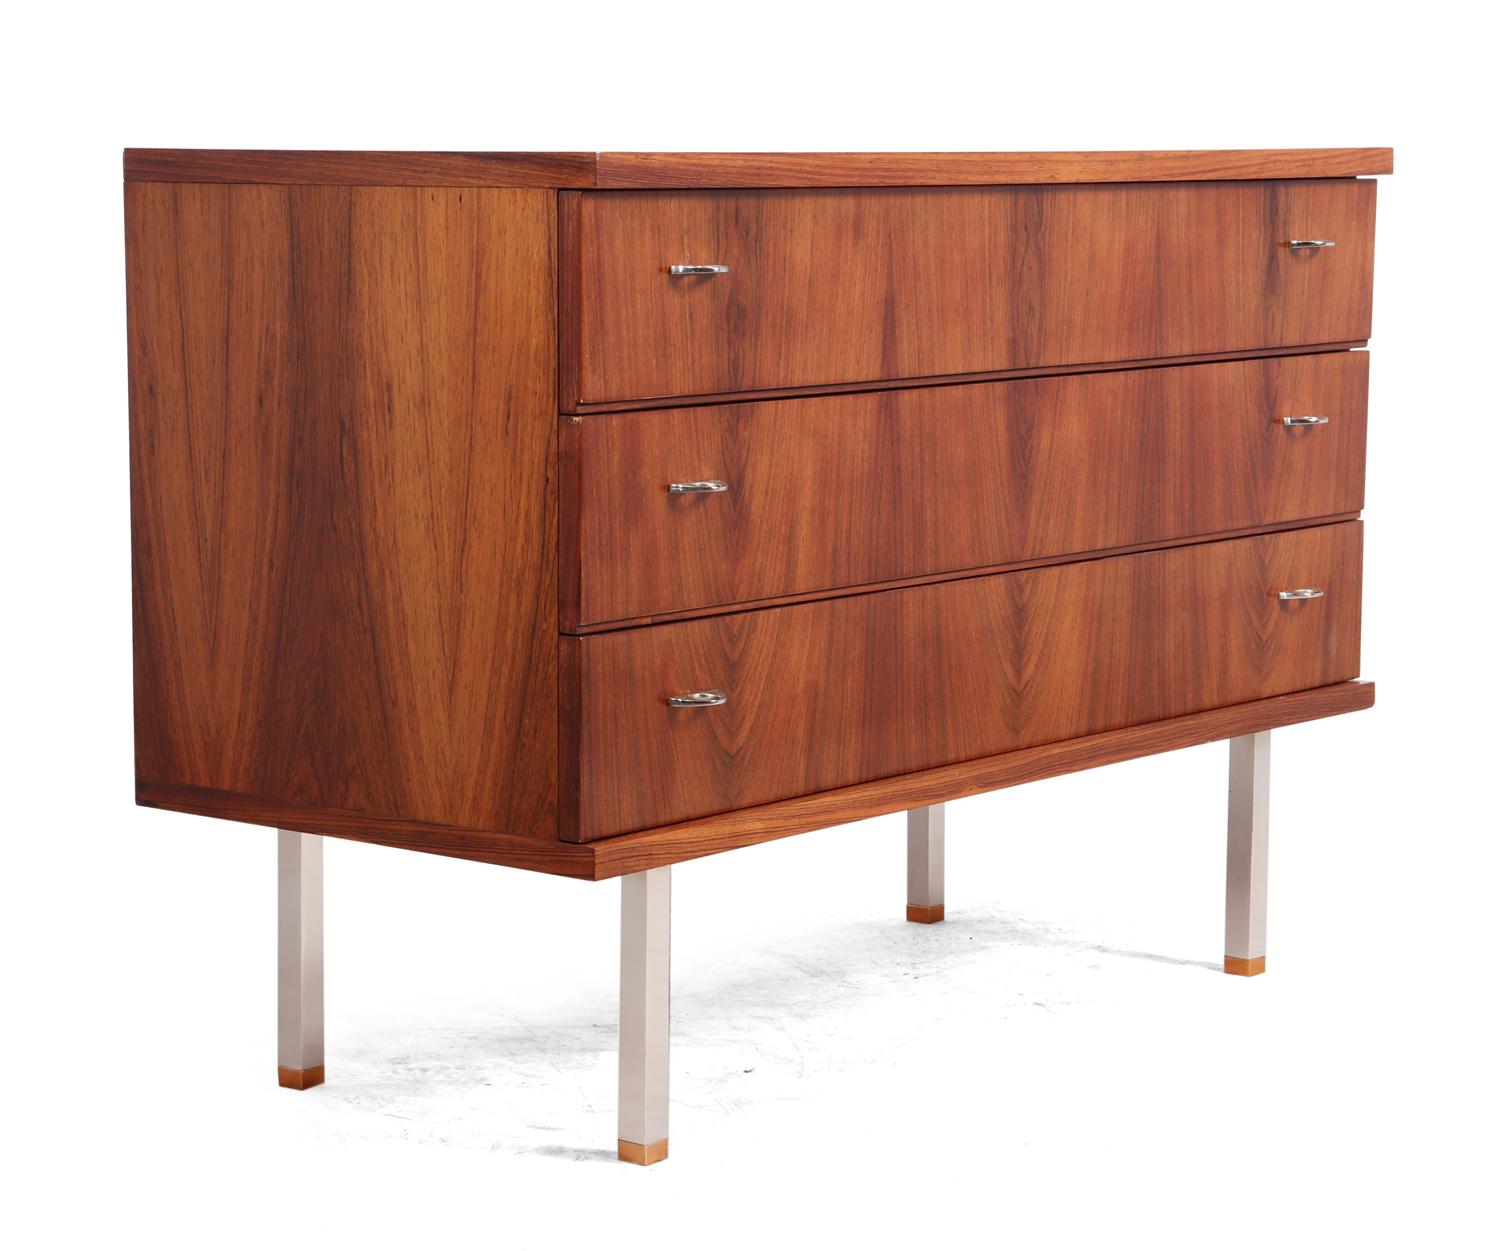 Midcentury chest of drawers
A French midcentury chest of three drawers with chromed steel finger hole drawer pulls aluminum legs with copper feet tips

Age: 1960

Style: Mid-Century Modern

Material: Rosewood

Origin : France

Condition: